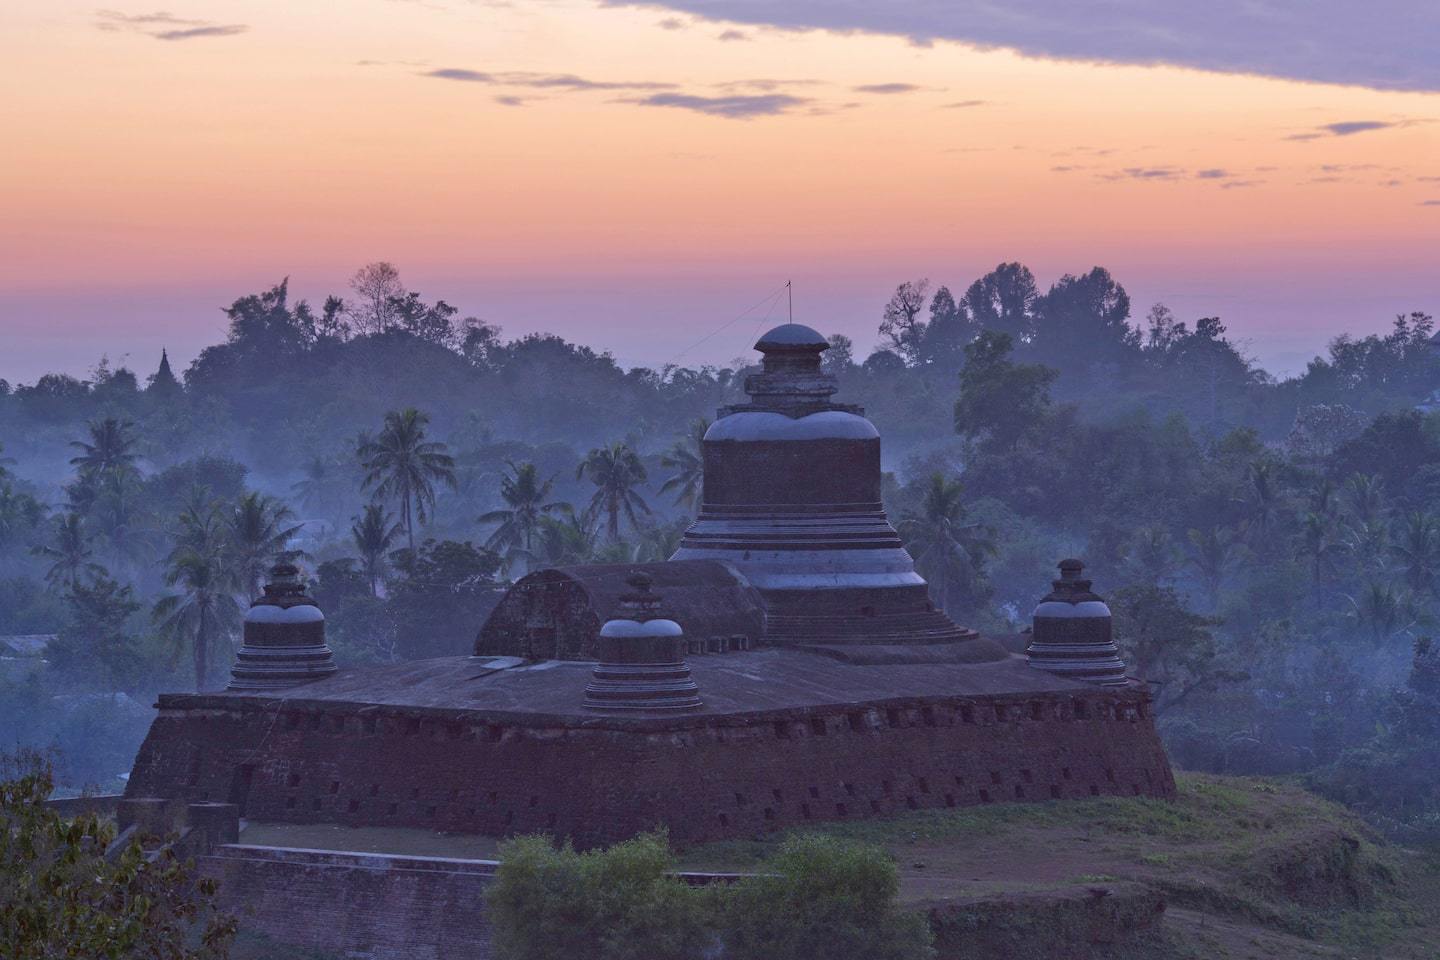 Ancient temple in Myanmar at sunset with black stupas